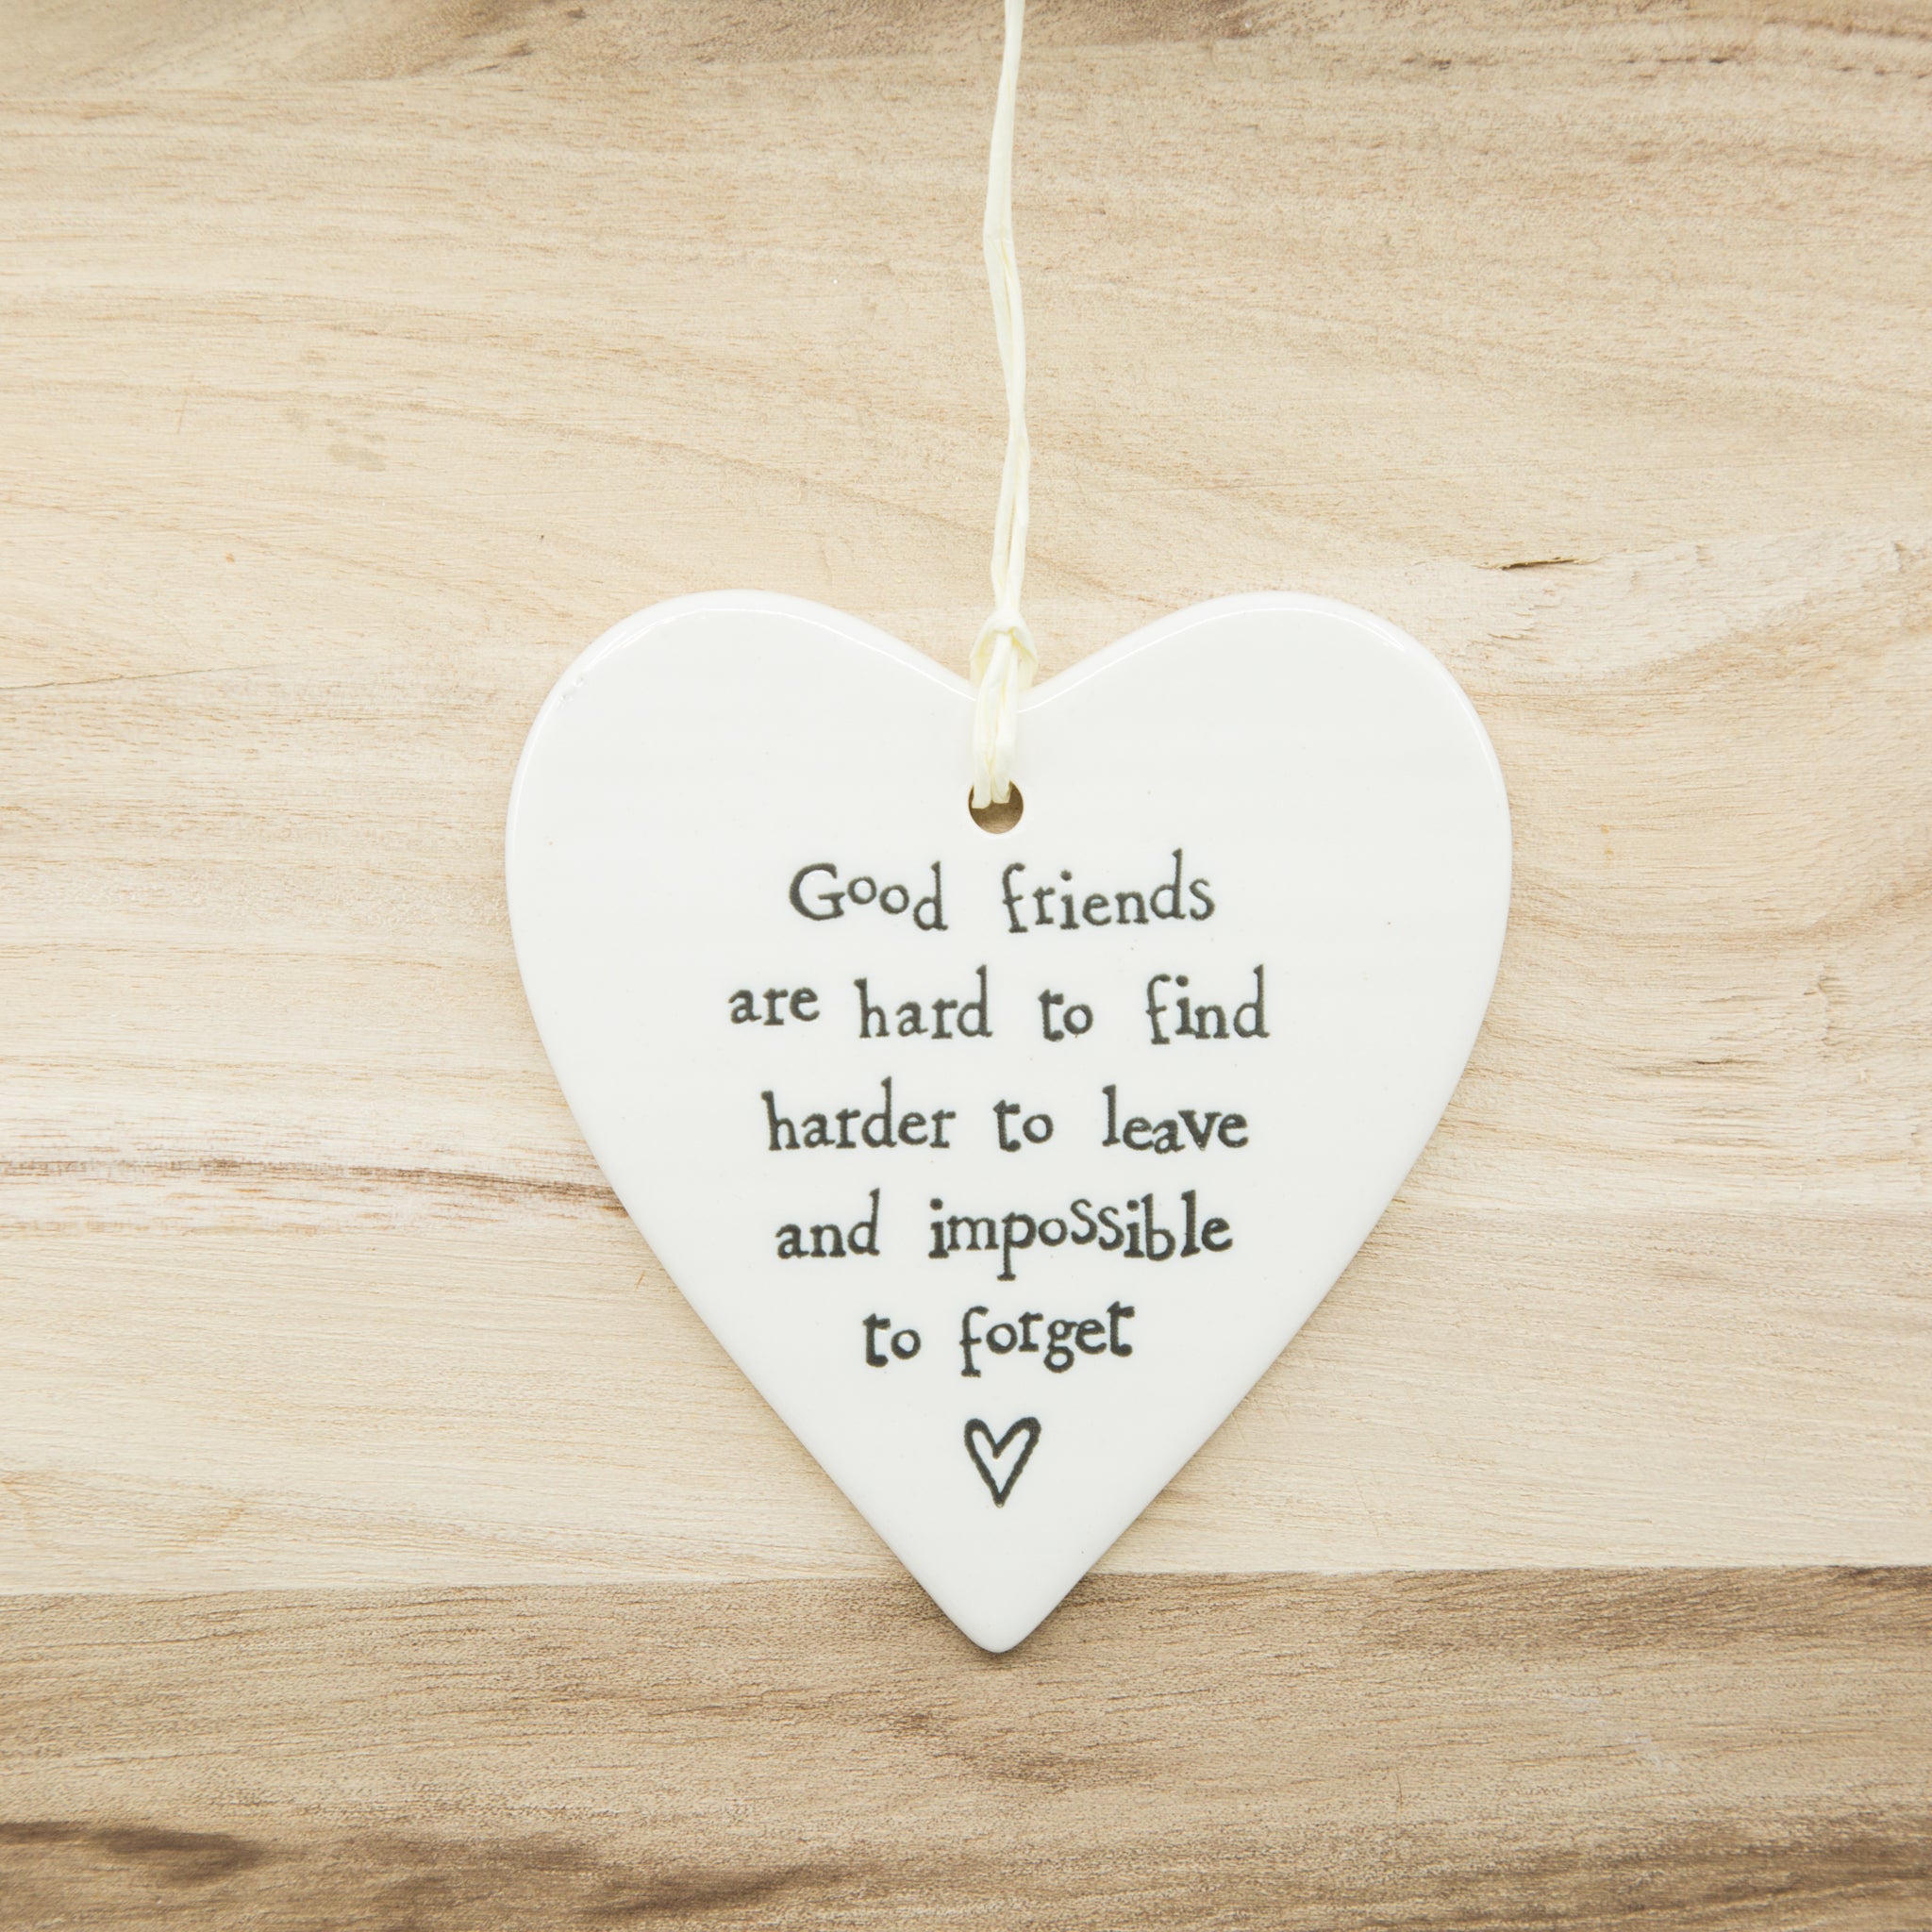 Good friends are hard to find -Round Heart Porcelain Hanger